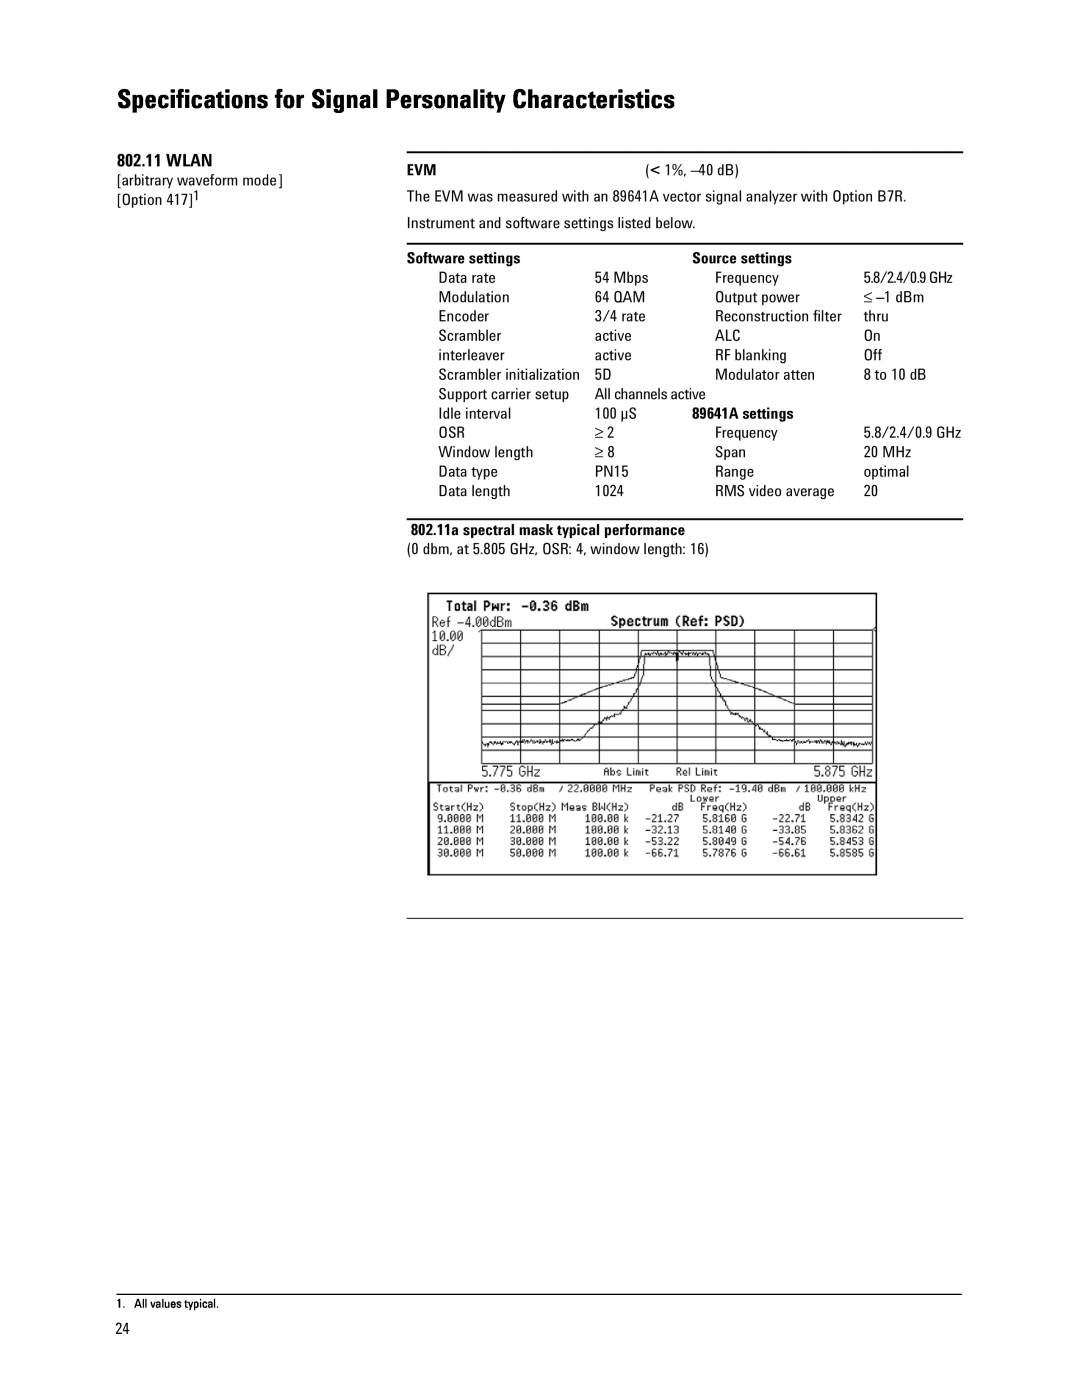 Agilent Technologies E4438C manual Wlan, Specifications for Signal Personality Characteristics, Software settings 